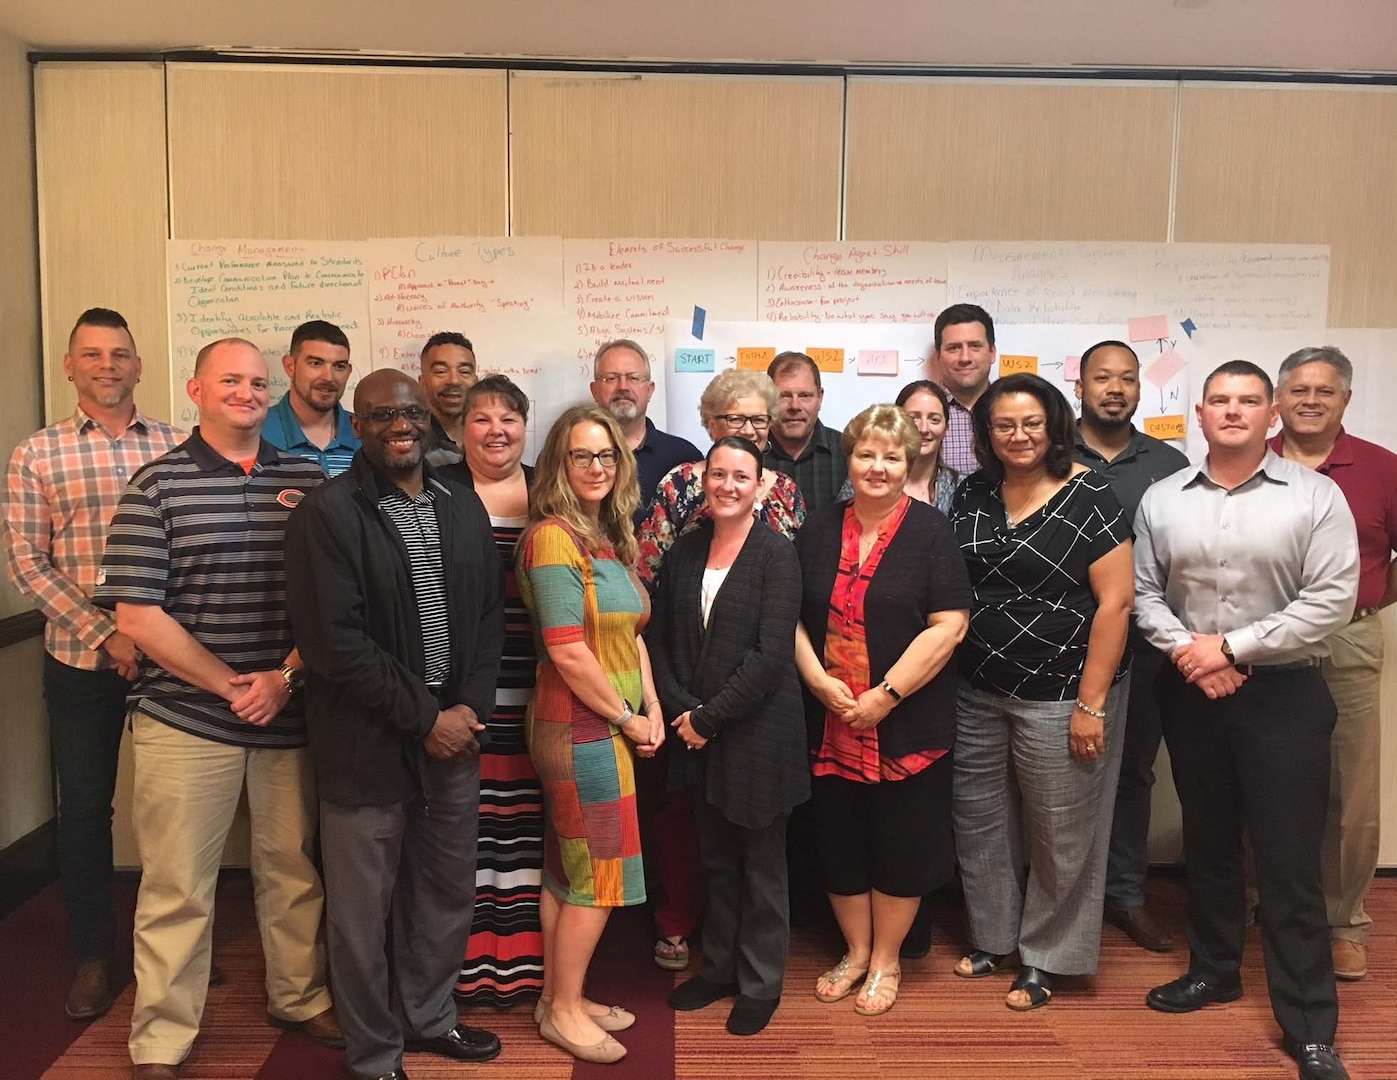 Eighteen Performance Improvement Officers, also known as PIOs, graduated from the Defense Contract Management Agency’s one-week green belt training on May 25. The training will help employees lead teams to update business processes across the agency. (DCMA photo by Andrew Miskovich)